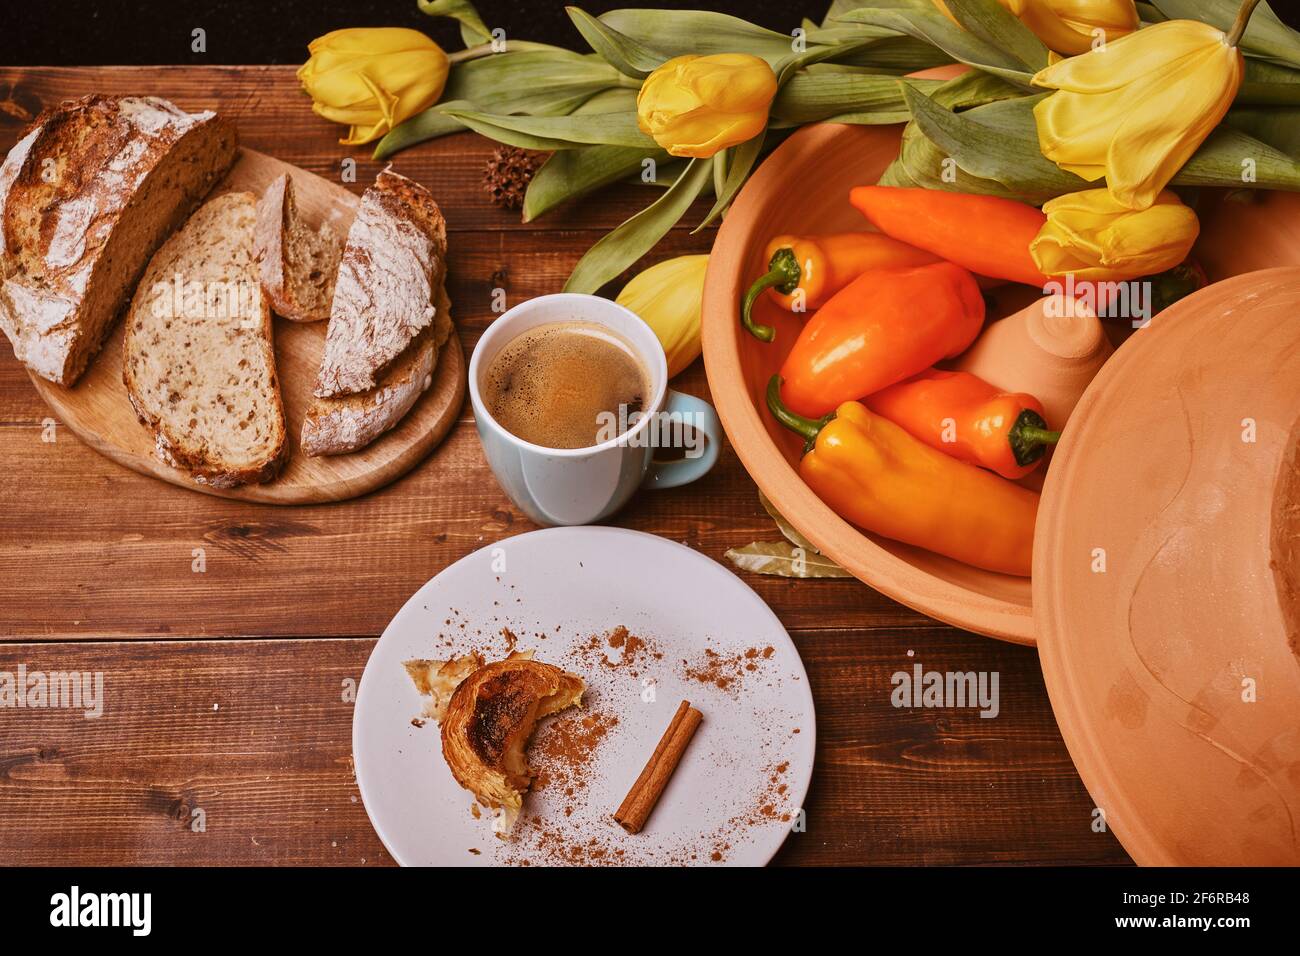 rustic table, with warm and cozy lighting shows cup with coffee, cinnamon, on the table you can also see peppers and a large ceramic bowl in raw color Stock Photo